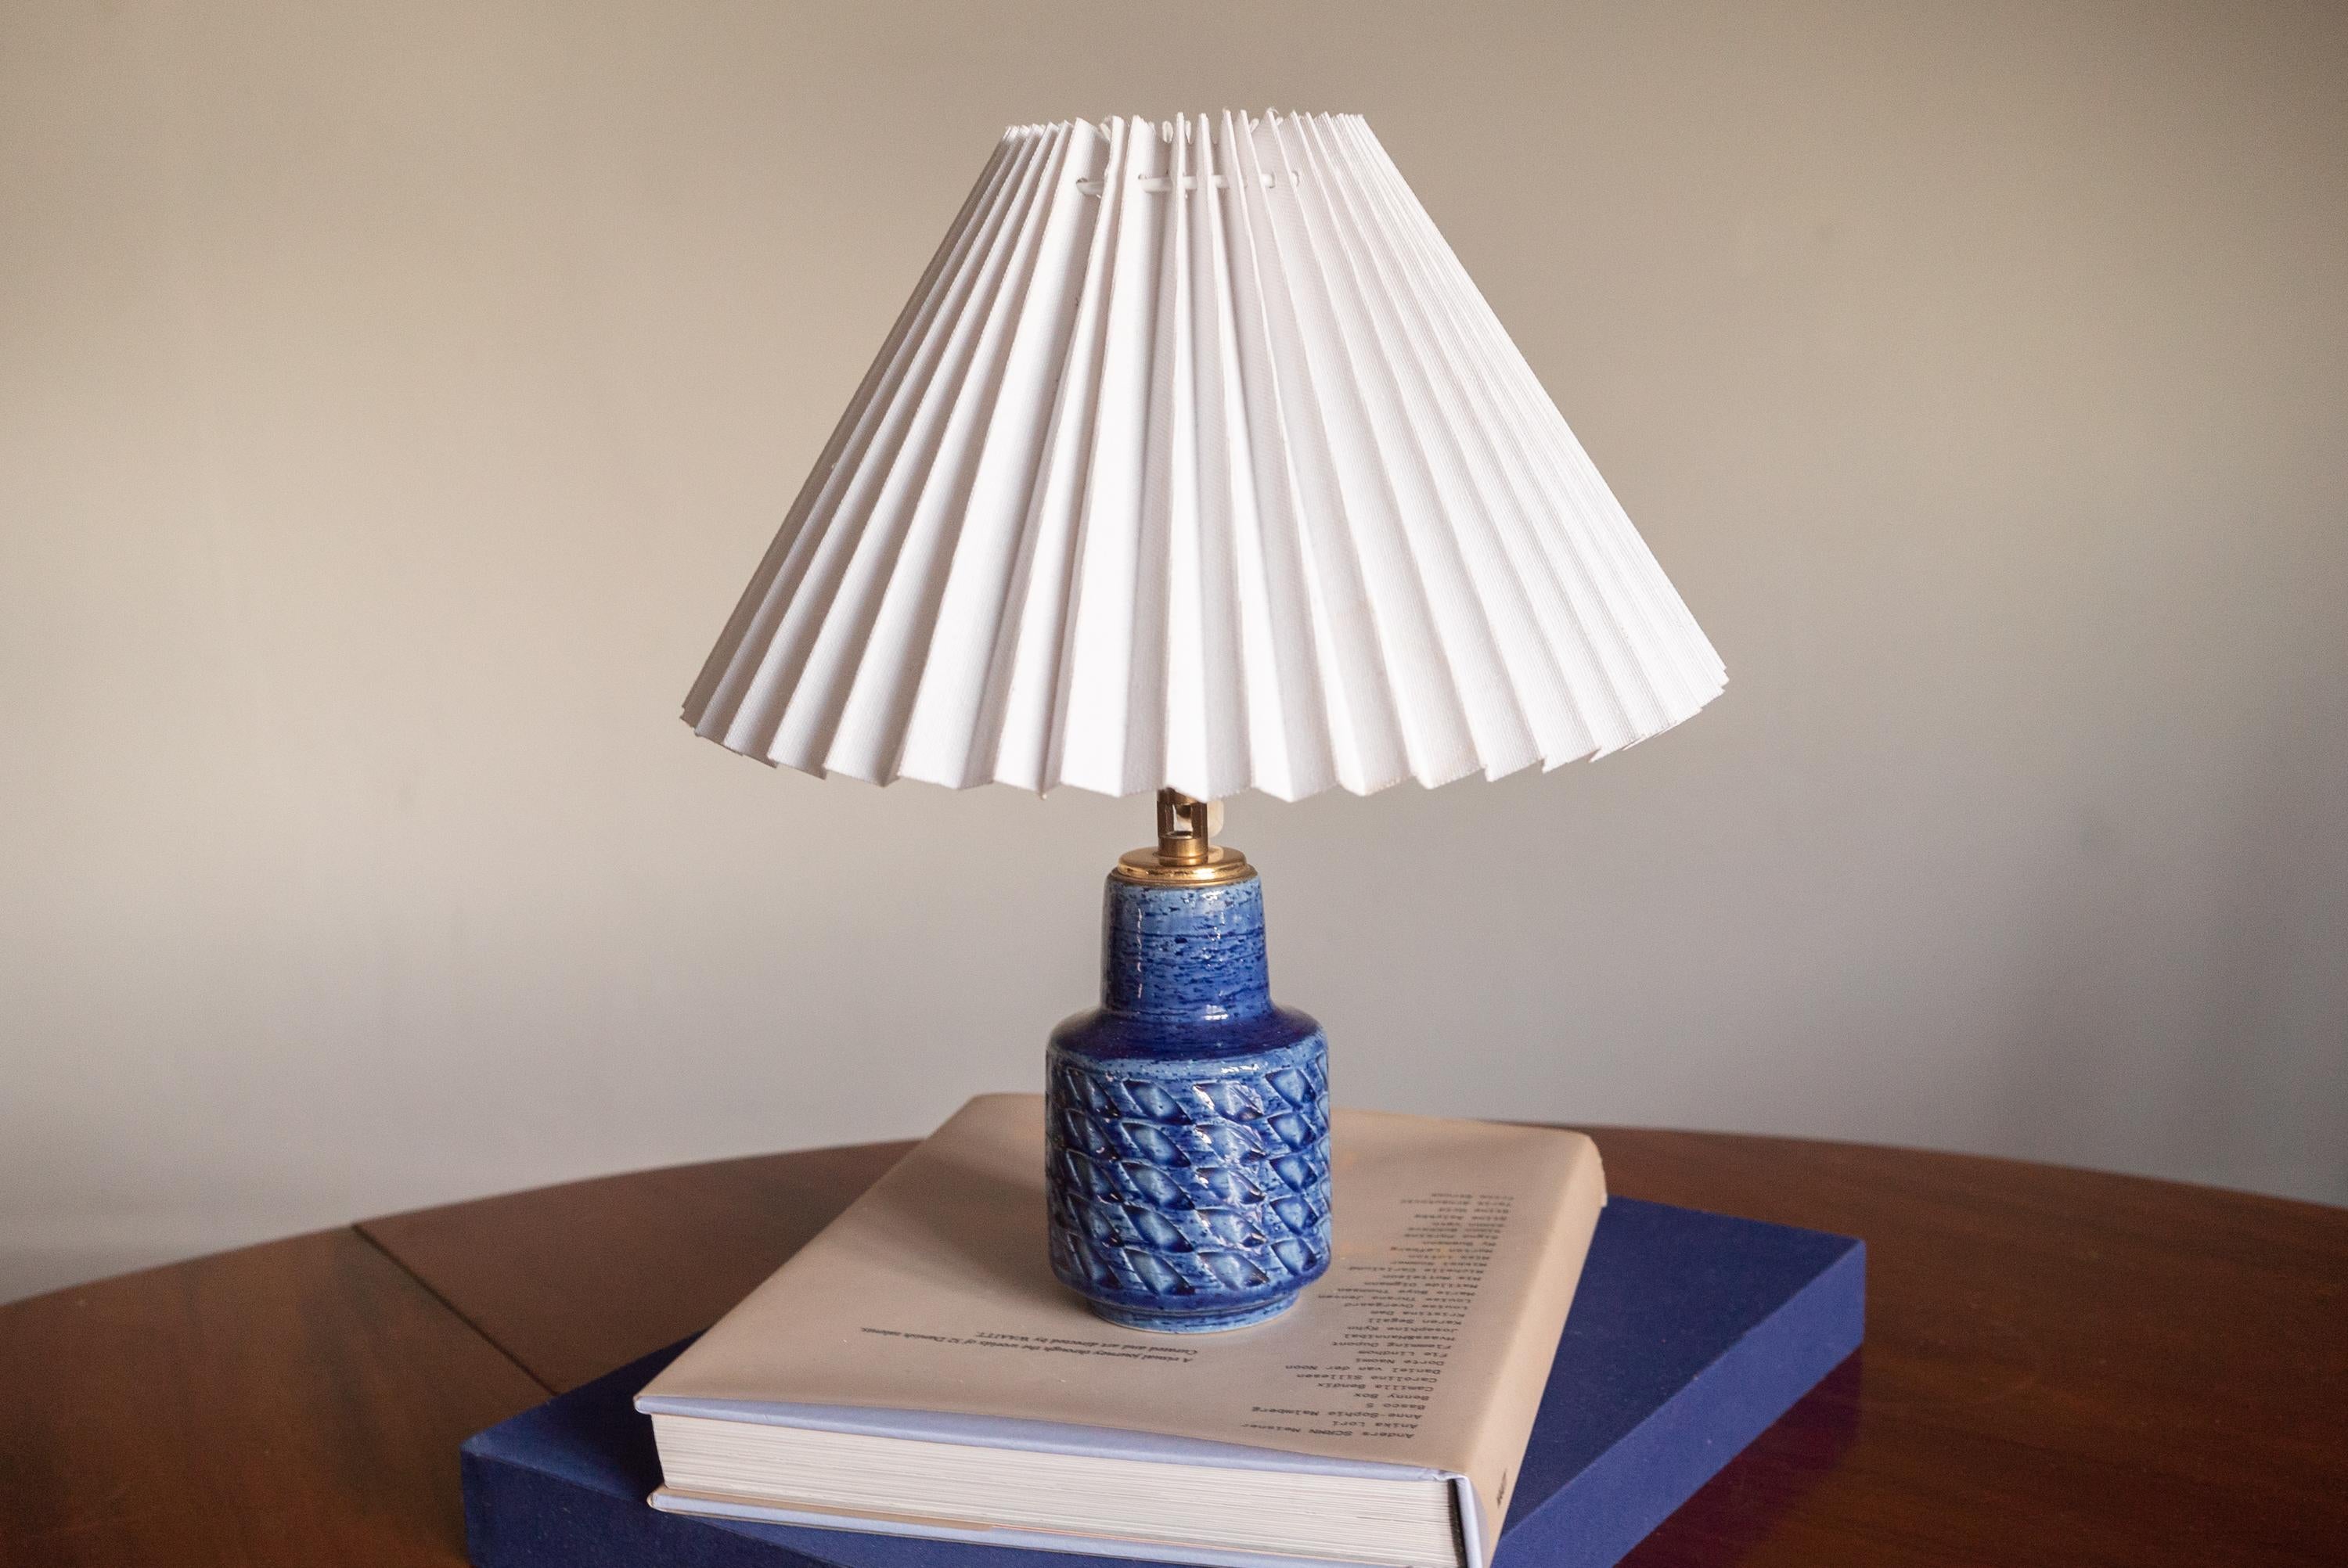 Small Palshus table- and bedside lamp with blue glaze designed by Per Linnemann-Schmidt. Made in Denmark in the 1960s.

Sold without lampshade.
Light bulb: For type E 26/E 27 Edison screw-fitting. Max 75 W.

European plug. If you do not use